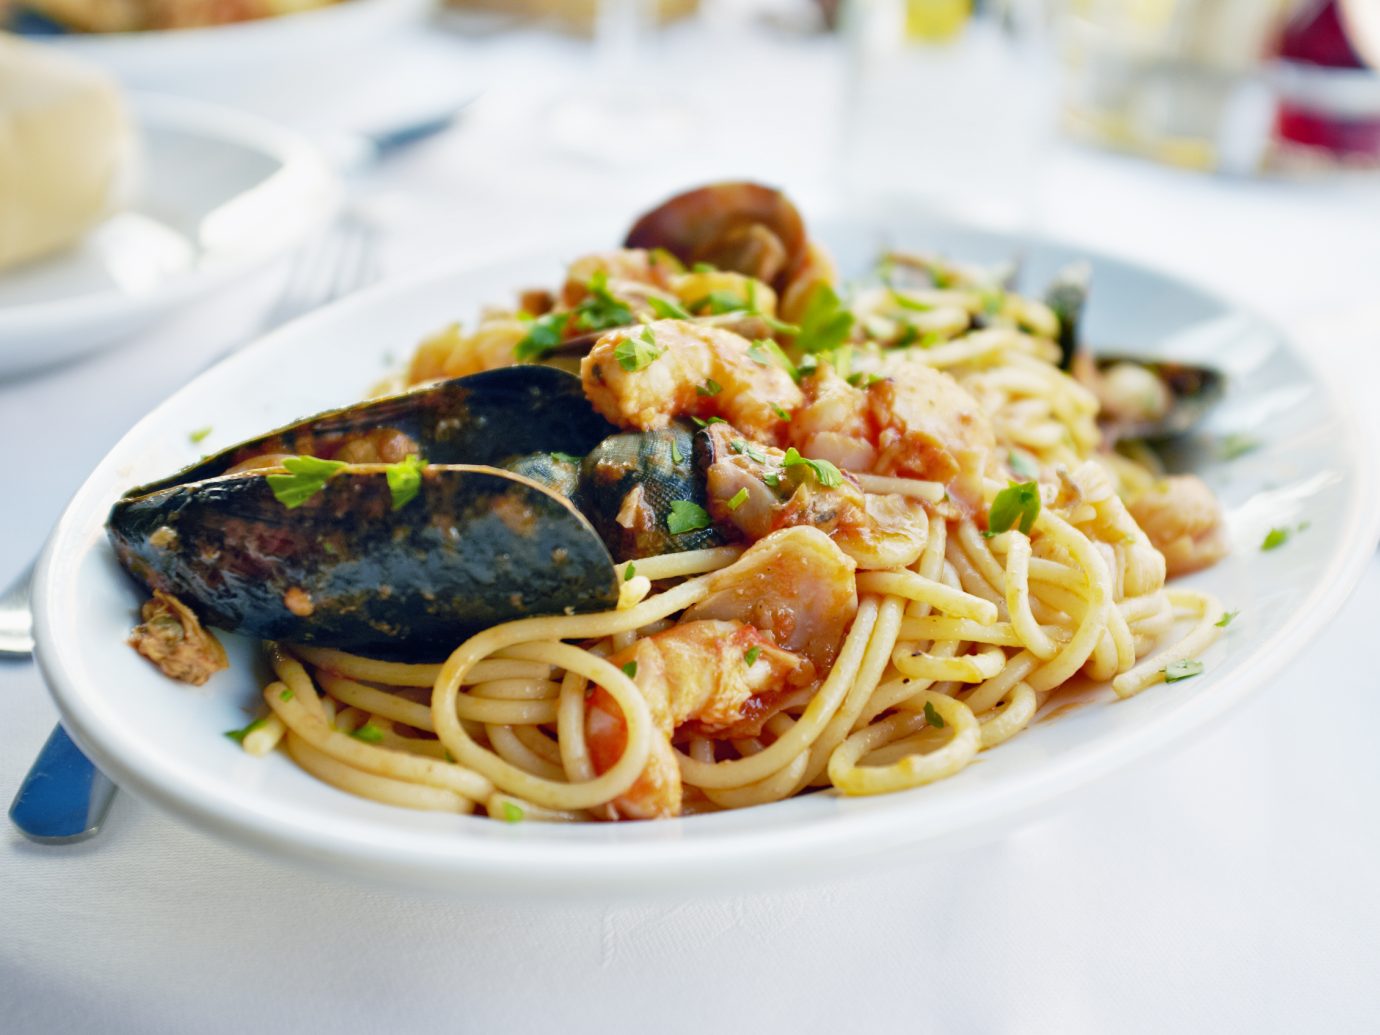 Fresh Seafood pasta - Spaghetti, clams, shrimps and squid, served in a restaurant in Italy.